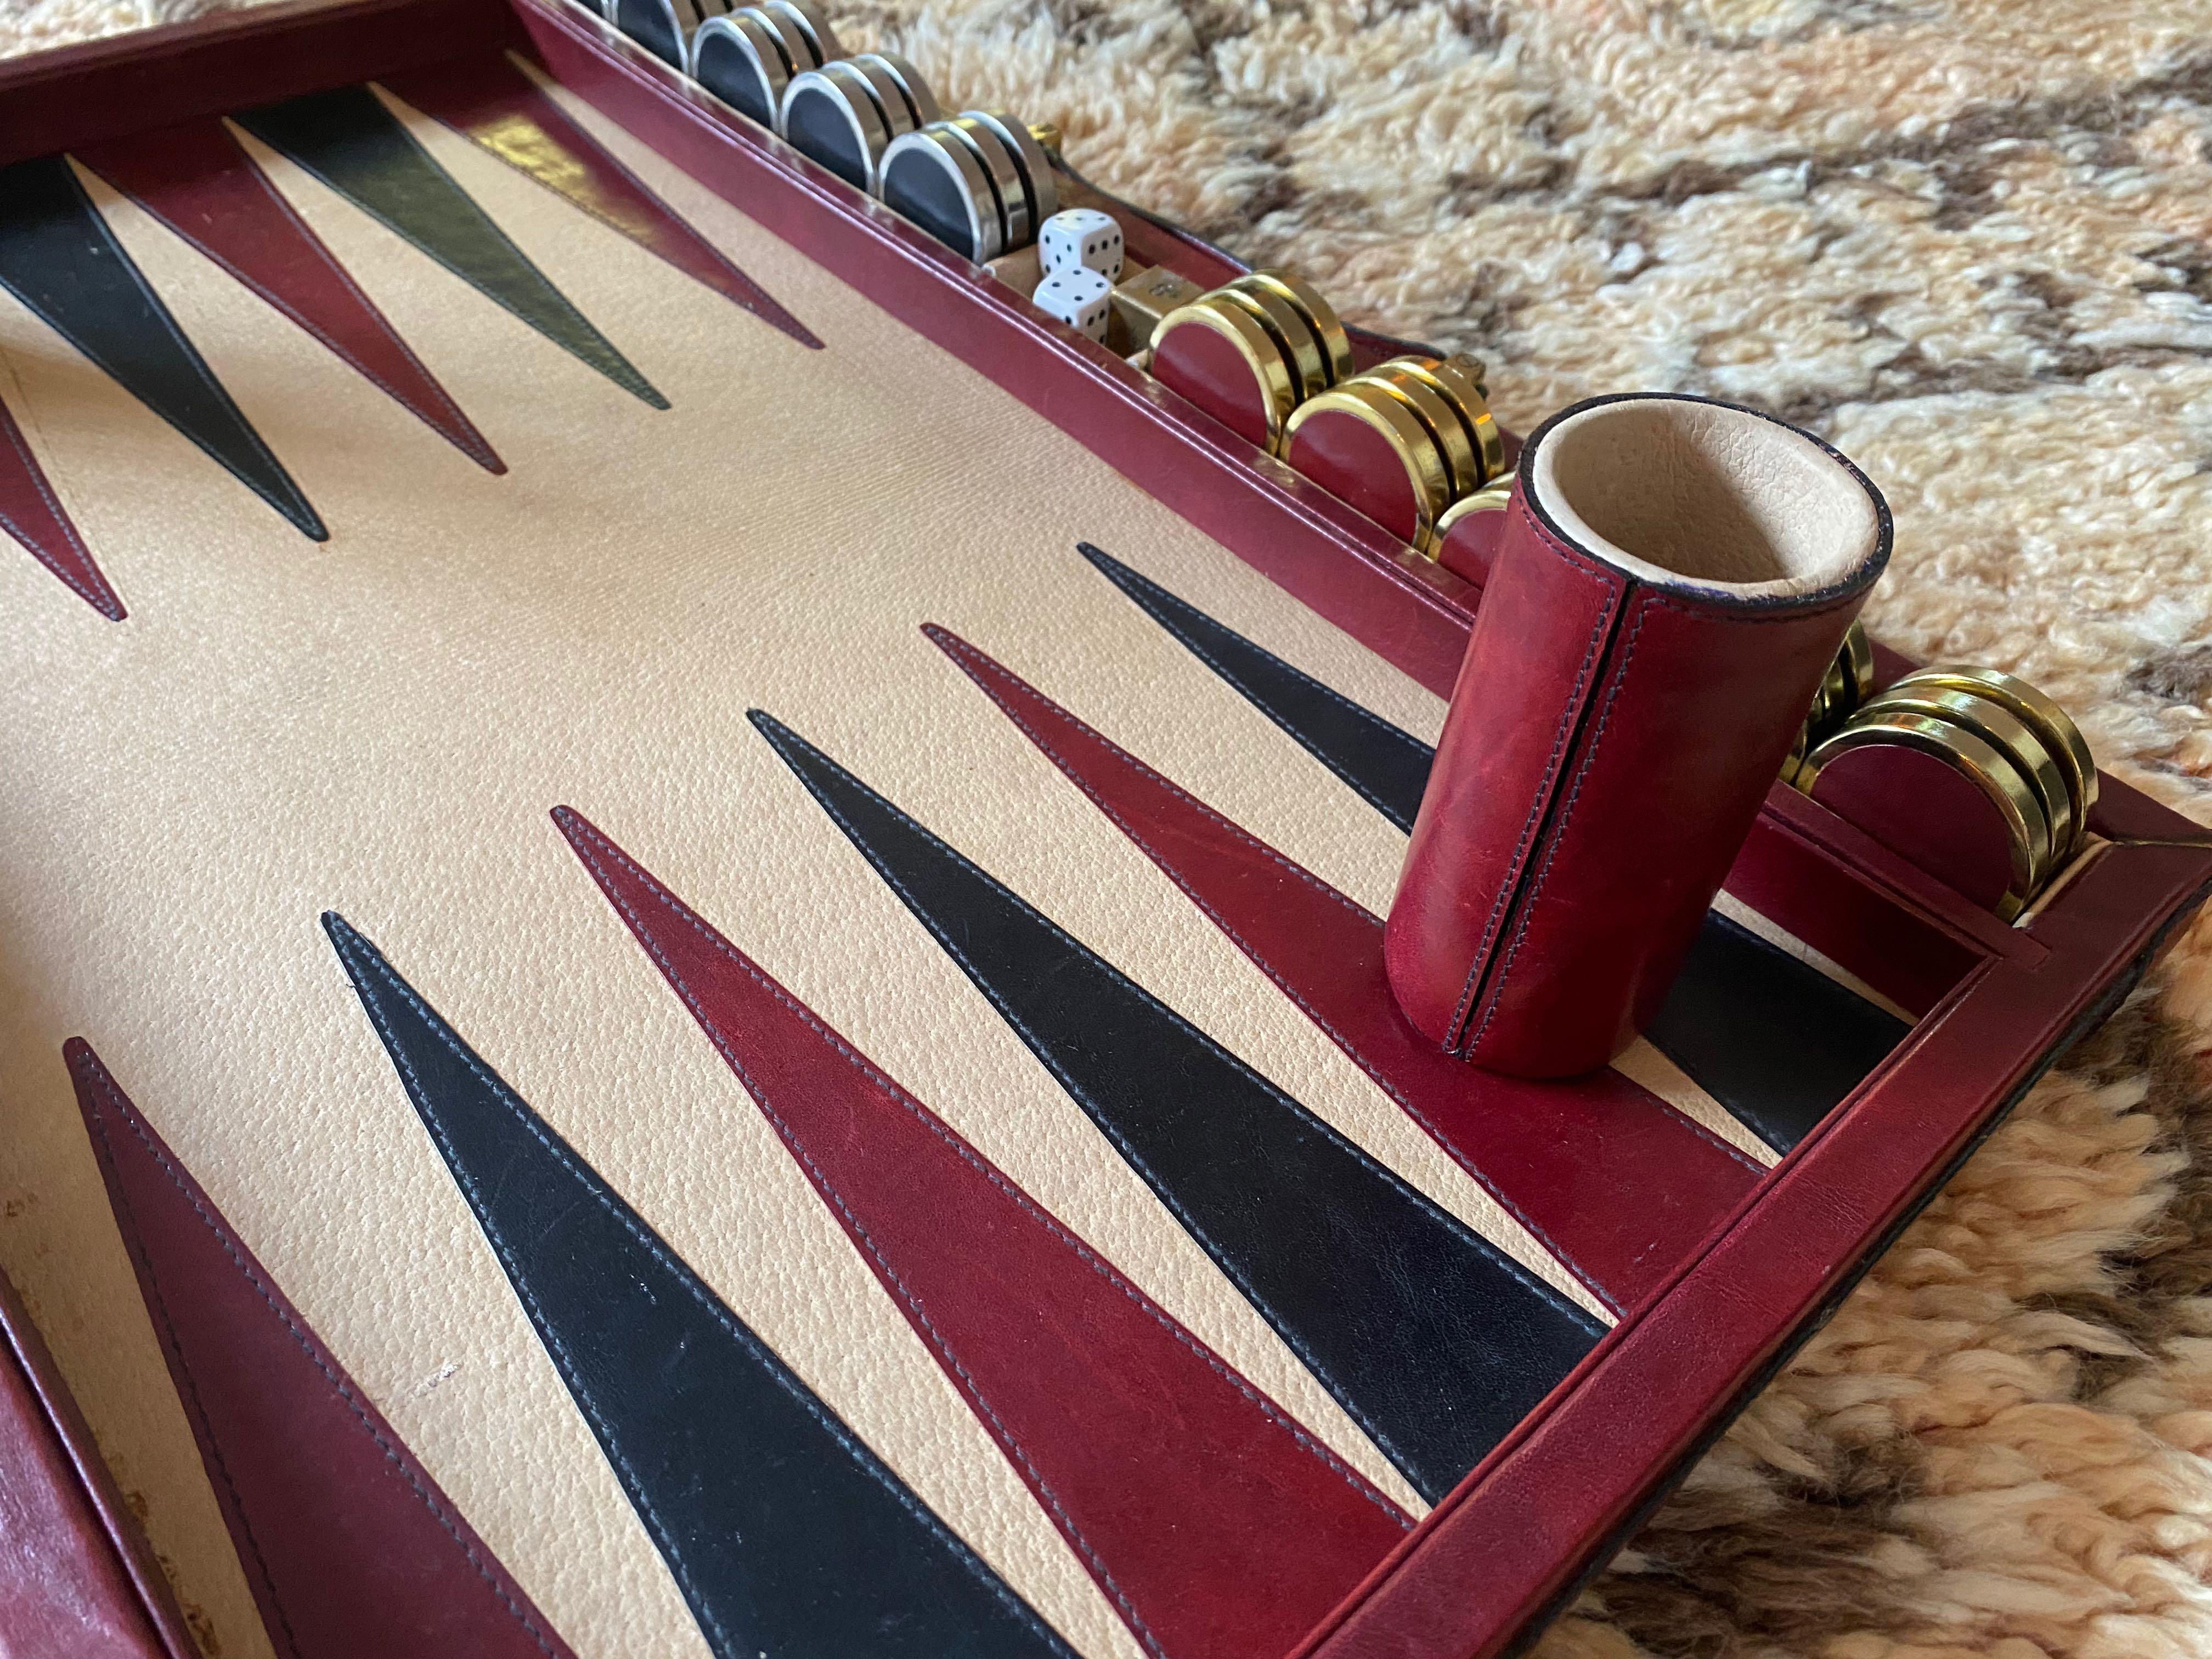 Gently played, vintage 1970 backgammon rare Etienne Aigner burgundy handmade soft leather set as pictured.
A rare find since they were just a few made guaranteeing the maximum level of craftsmanship and luxury. 
The case has minor distress on the